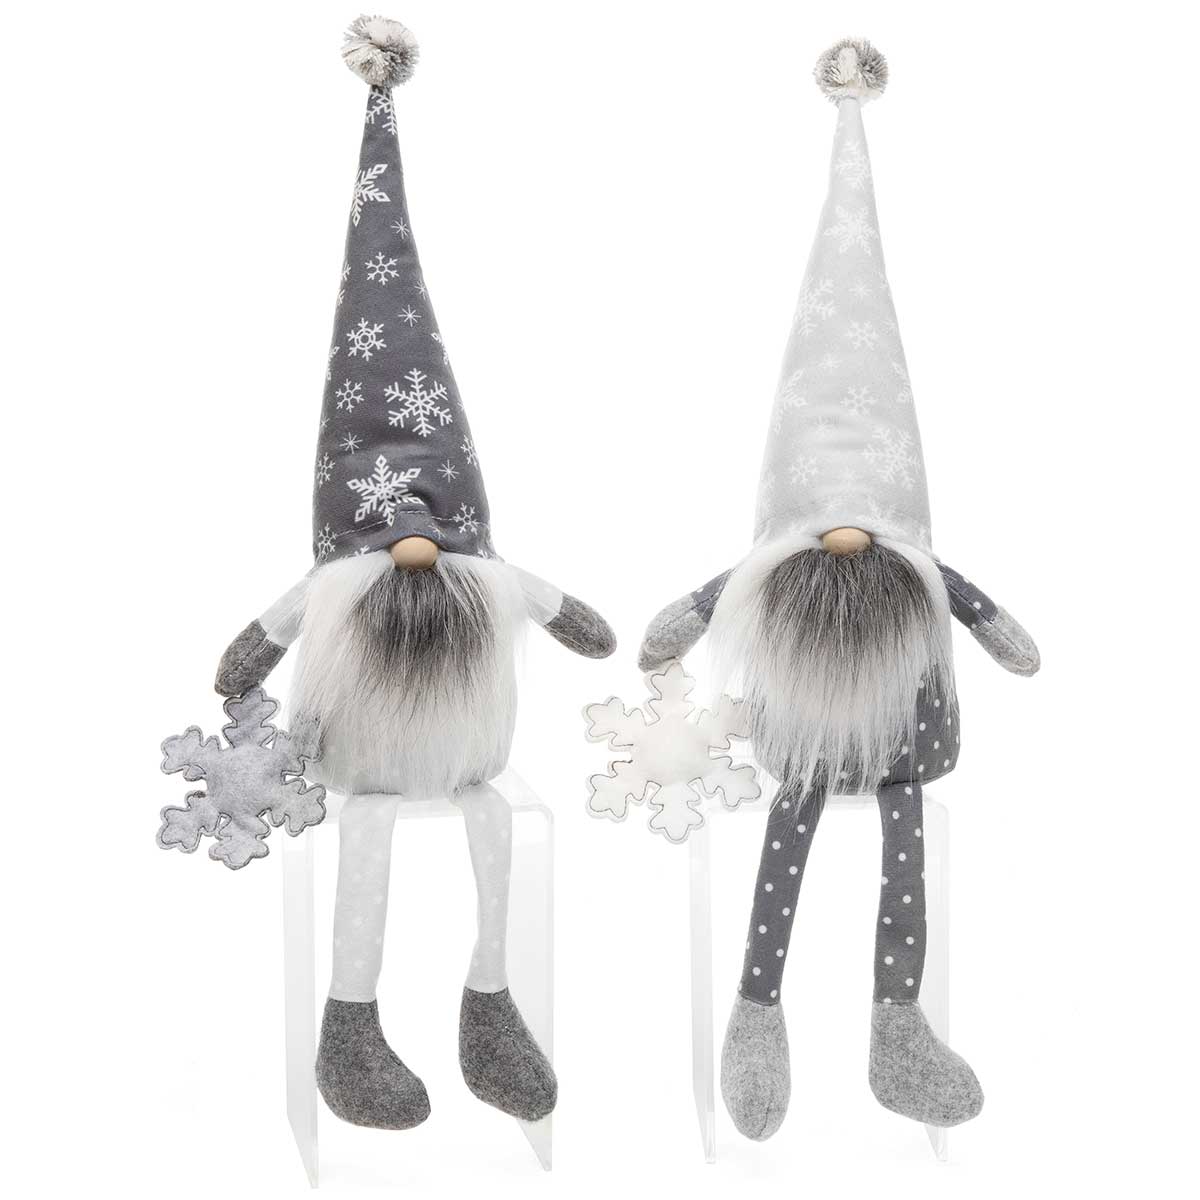 !SNOWFLAKE GNOME WITH PINDOT BODY 2 AST LARGE